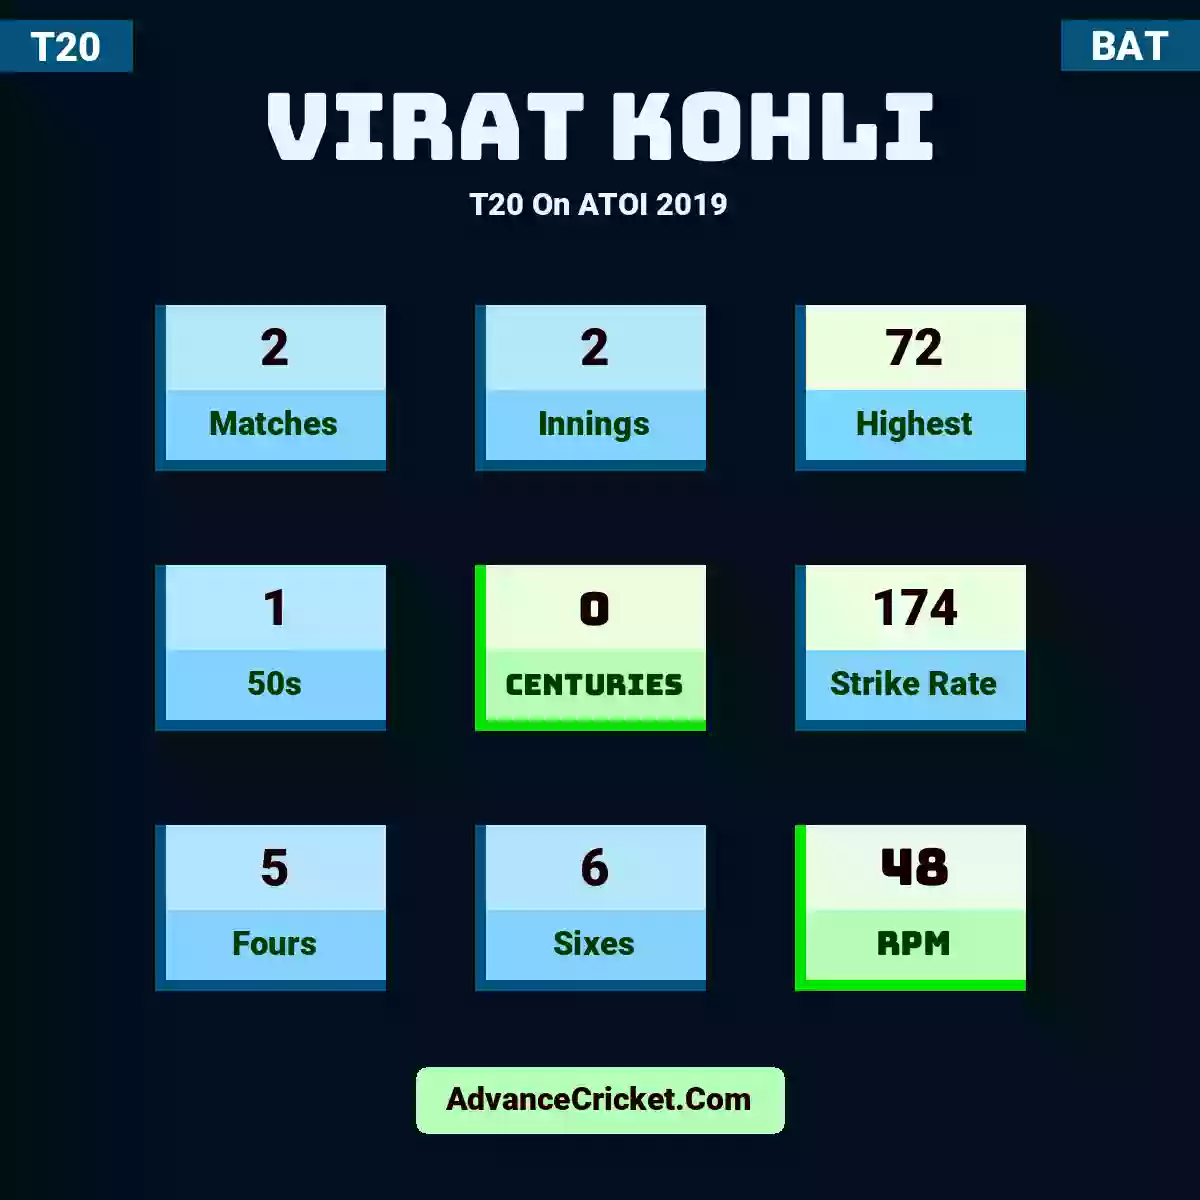 Virat Kohli T20  On ATOI 2019, Virat Kohli played 2 matches, scored 72 runs as highest, 1 half-centuries, and 0 centuries, with a strike rate of 174. V.Kohli hit 5 fours and 6 sixes, with an RPM of 48.